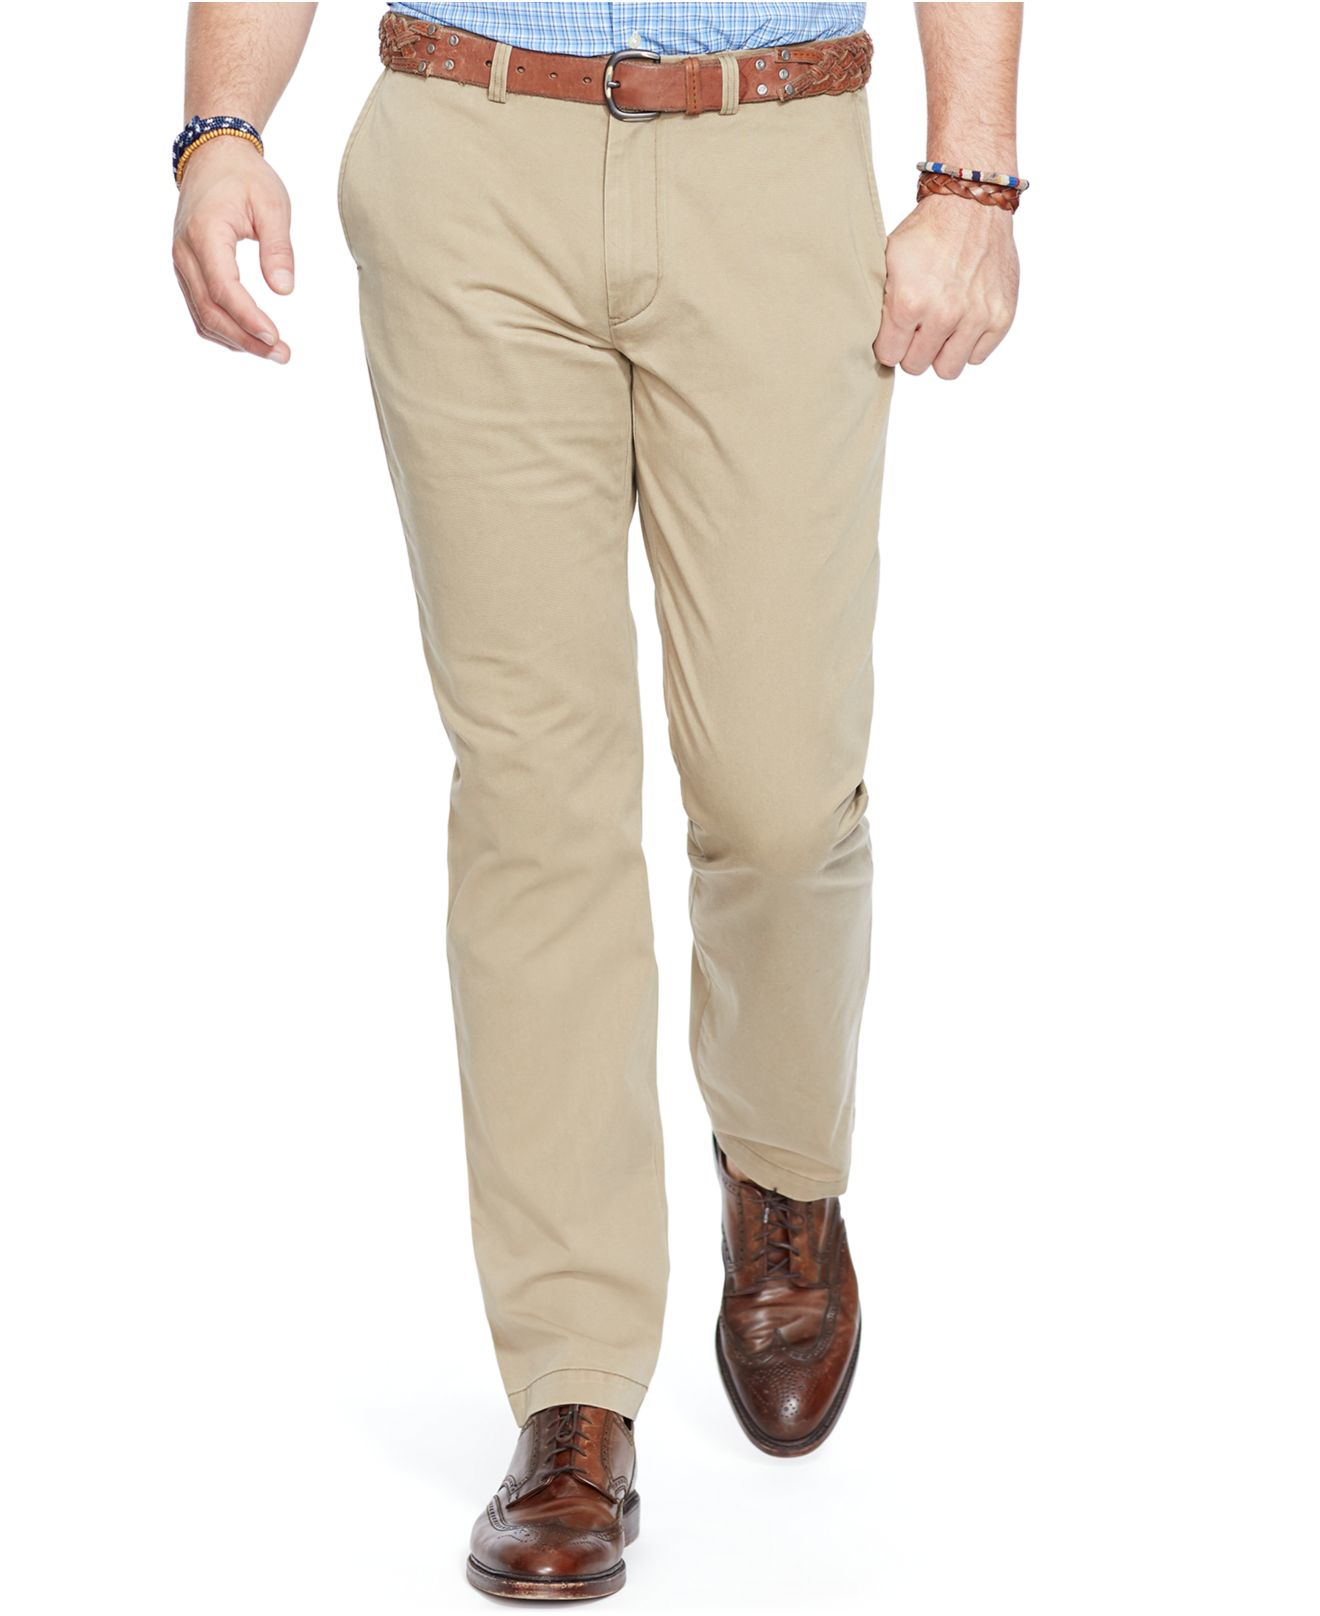 Lyst - Polo Ralph Lauren Big And Tall Classic-fit Flat-front Chino ...